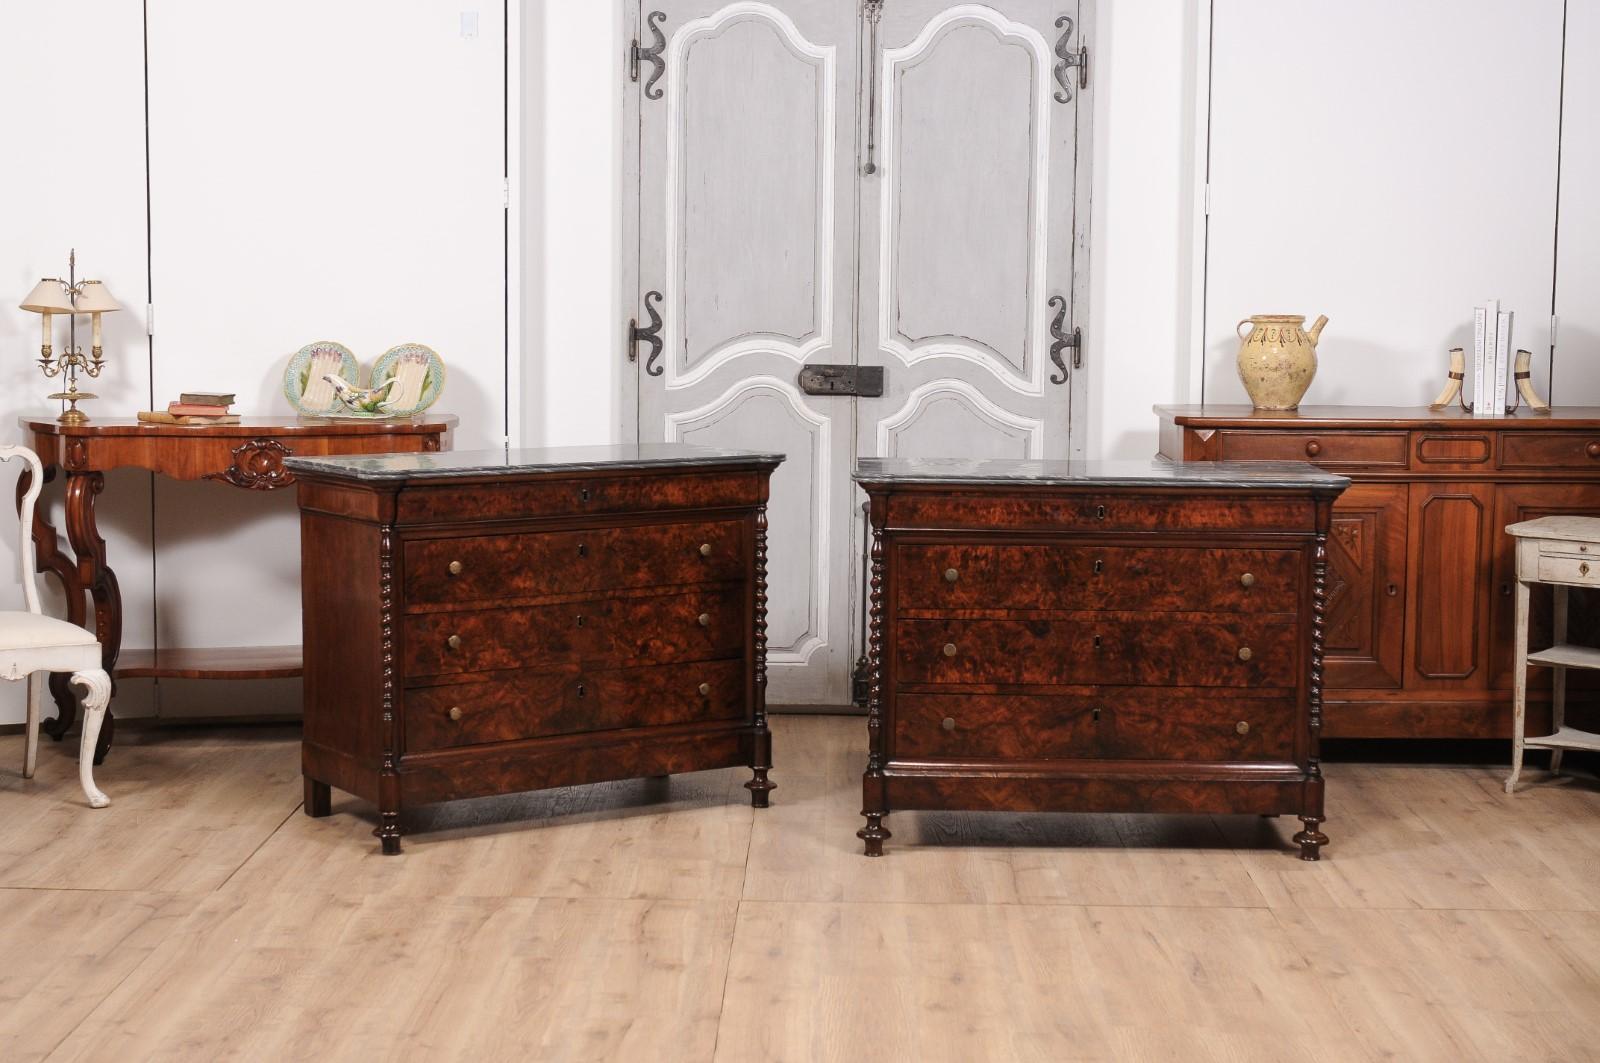 Turned Italian 1830s Burl Walnut Commodes from Lombardi with Gray Marble Tops, a Pair For Sale